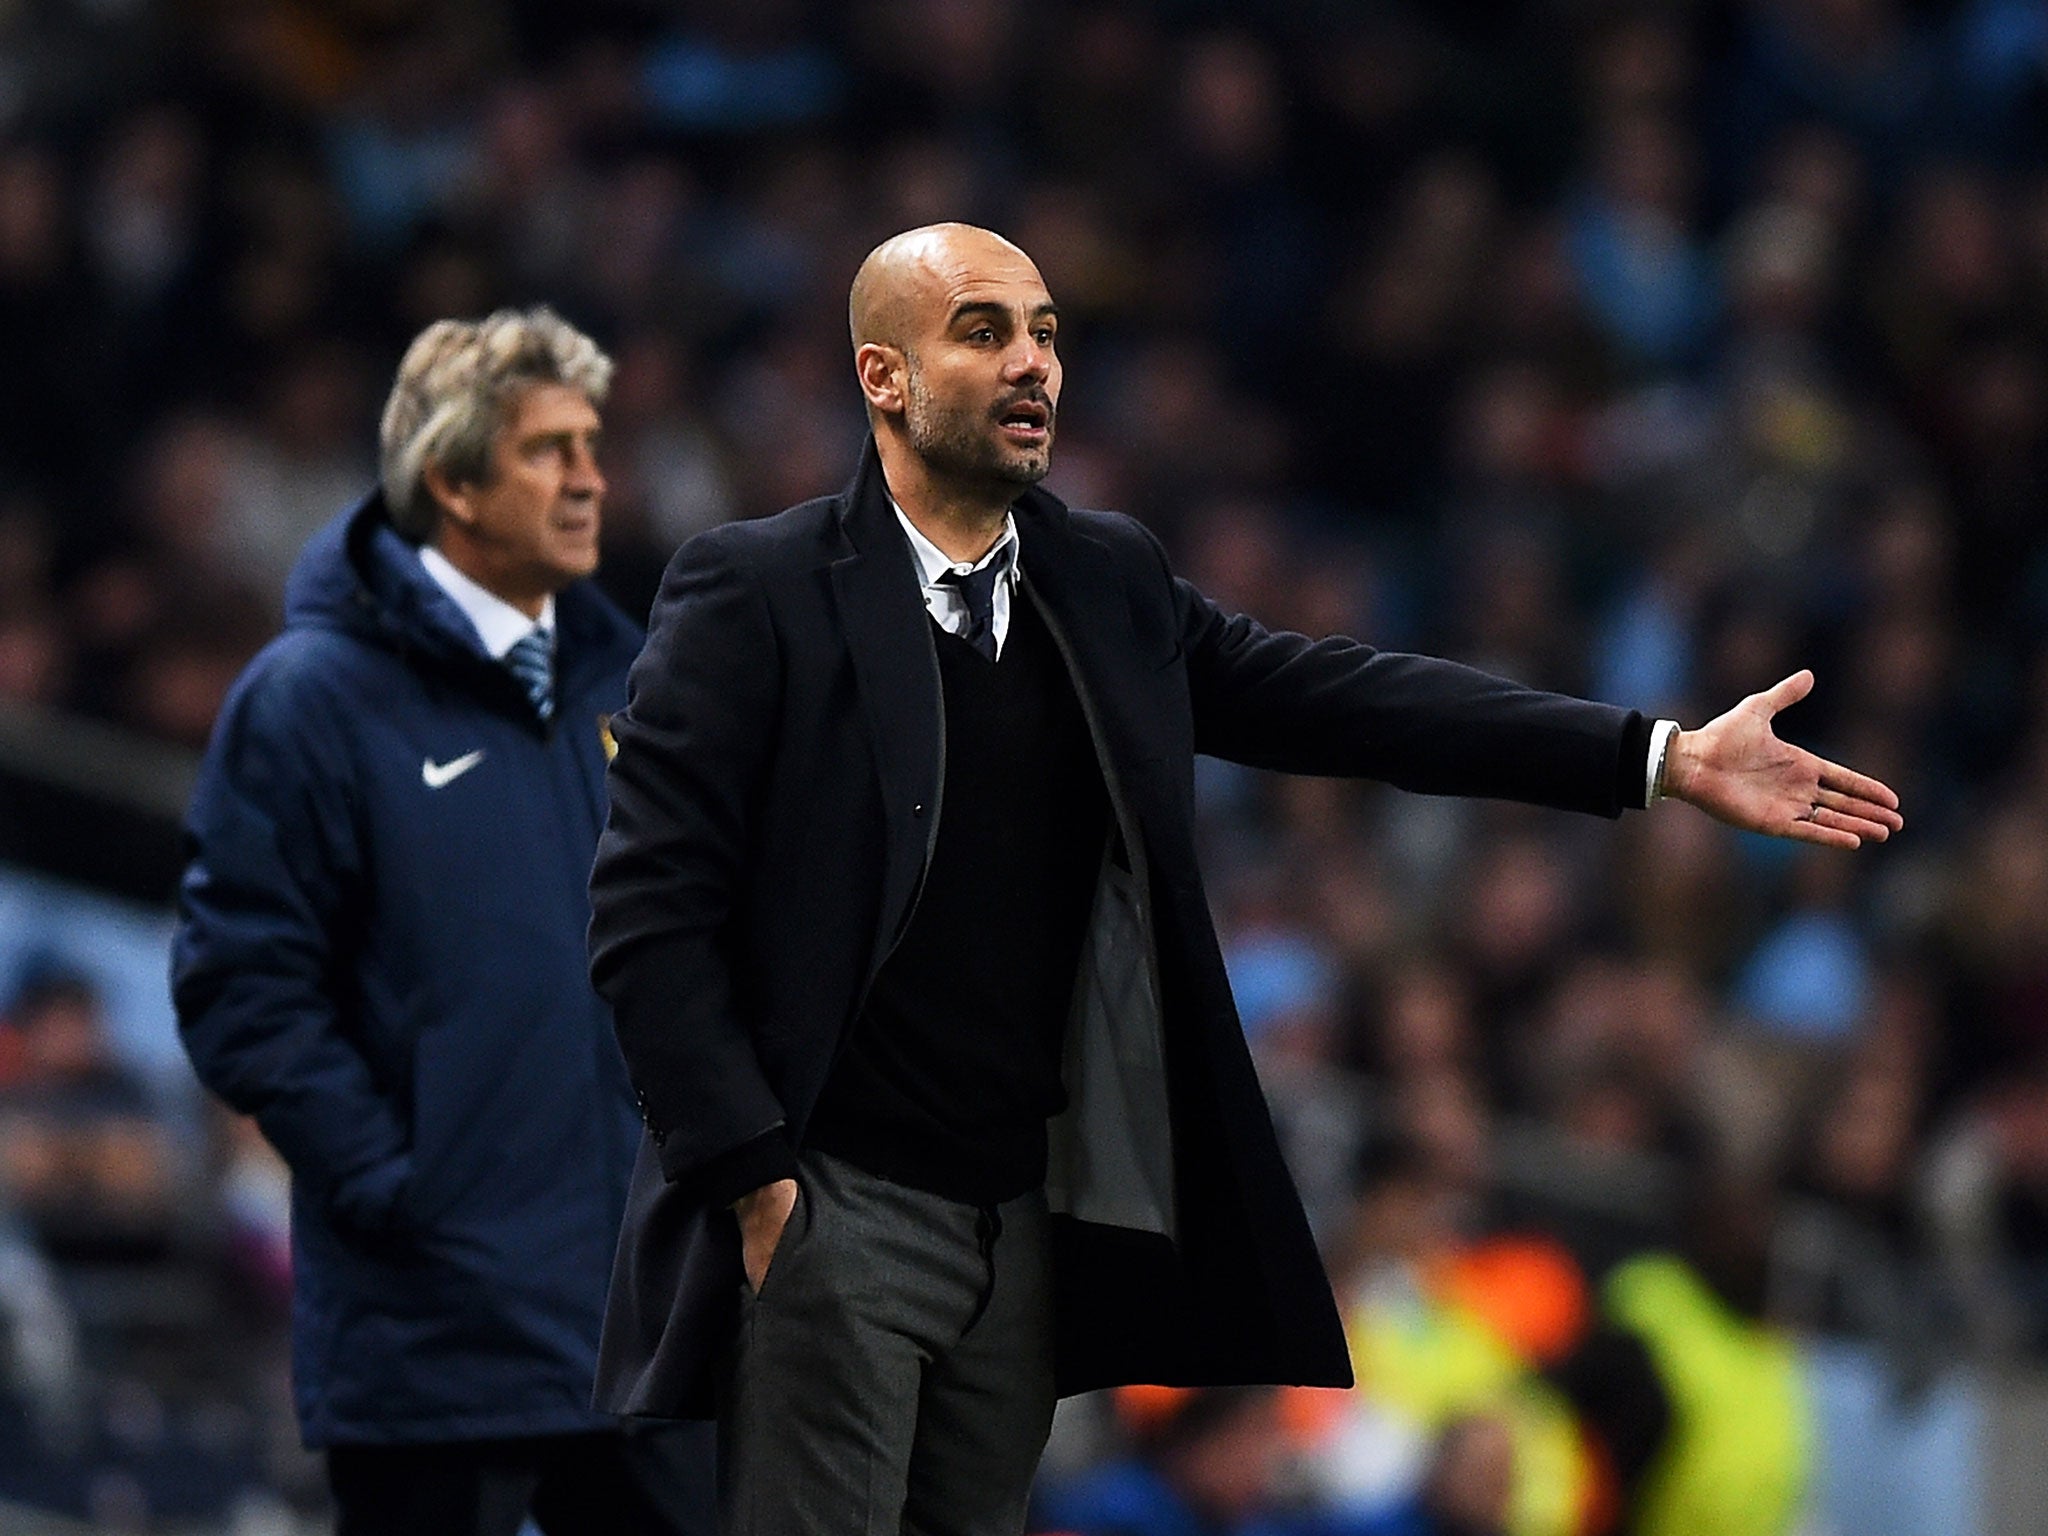 Pep Guardiola will replace Manuel Pellegrini at Manchester City at the end of the season